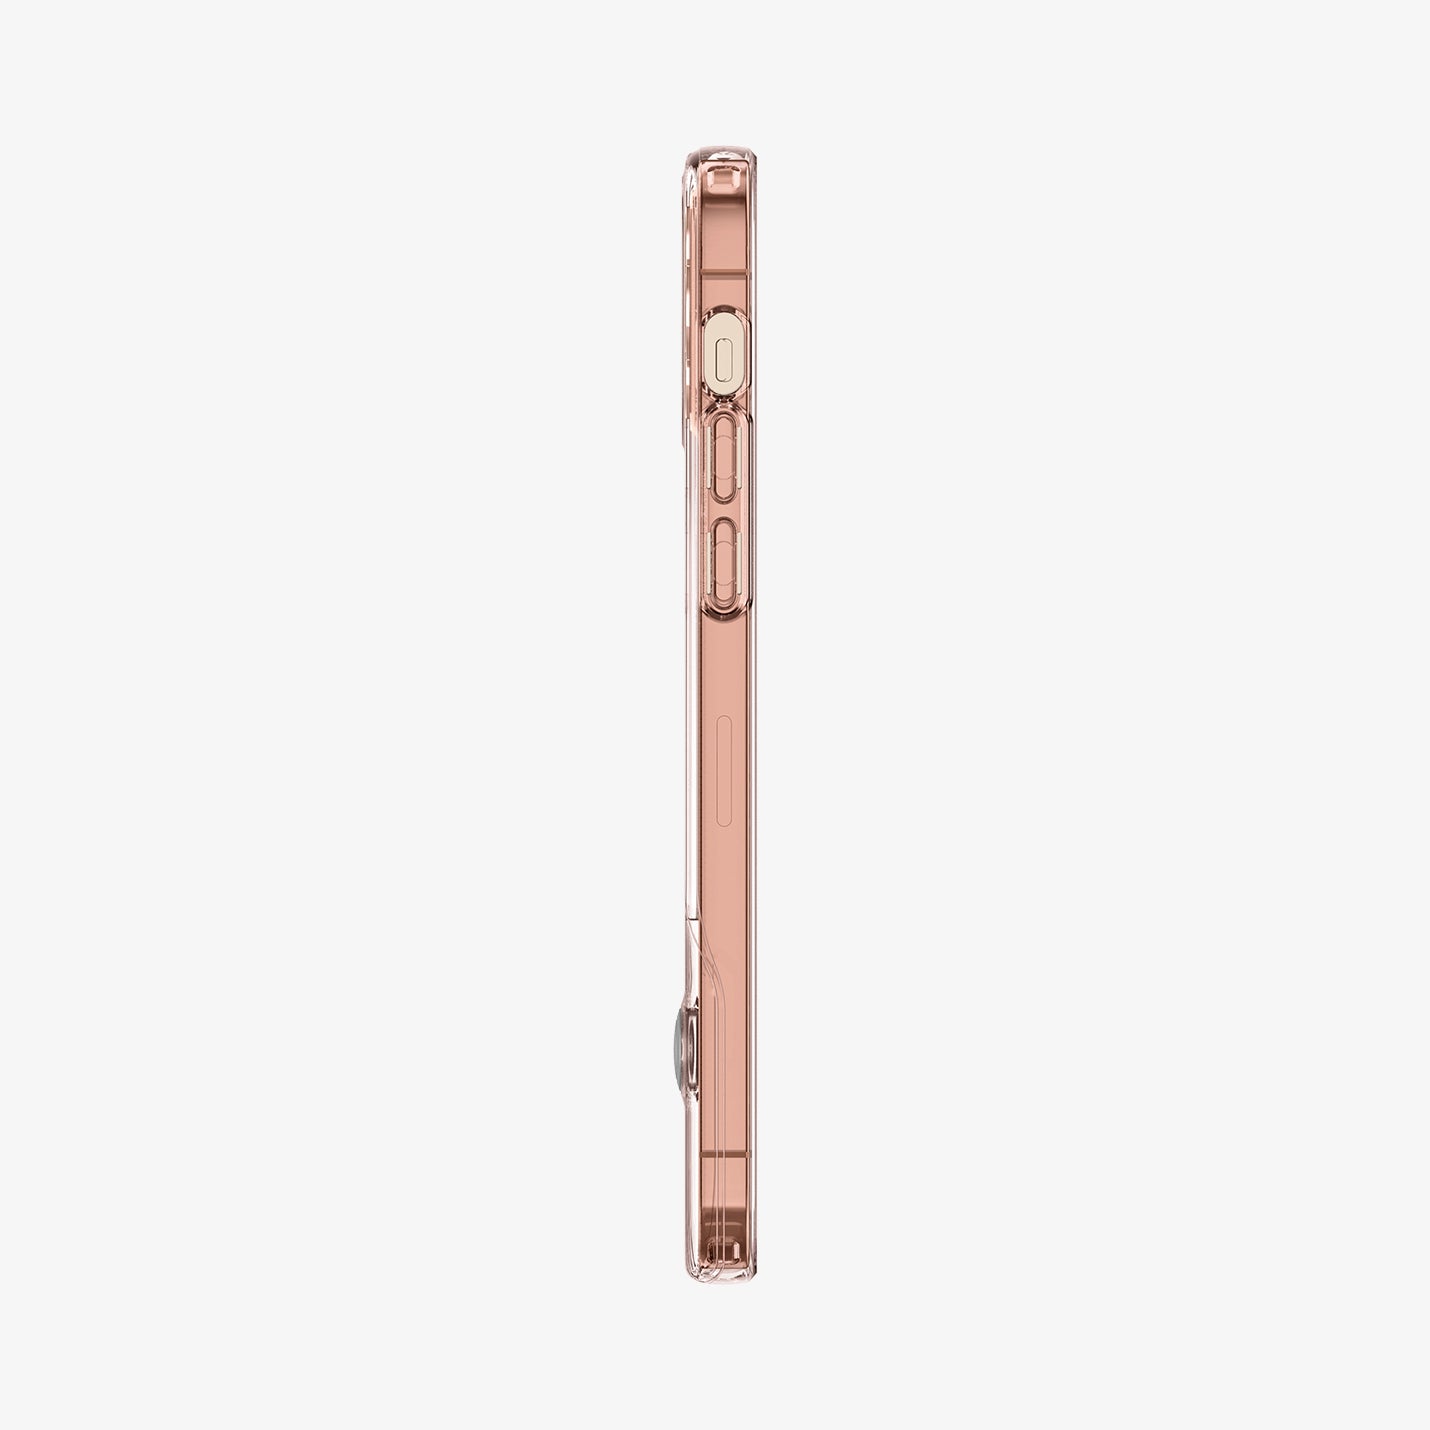 ACS01532 - iPhone 12 / iPhone 12 Pro Case Slim Armor Essential S in rose crystal showing the side with volume controls